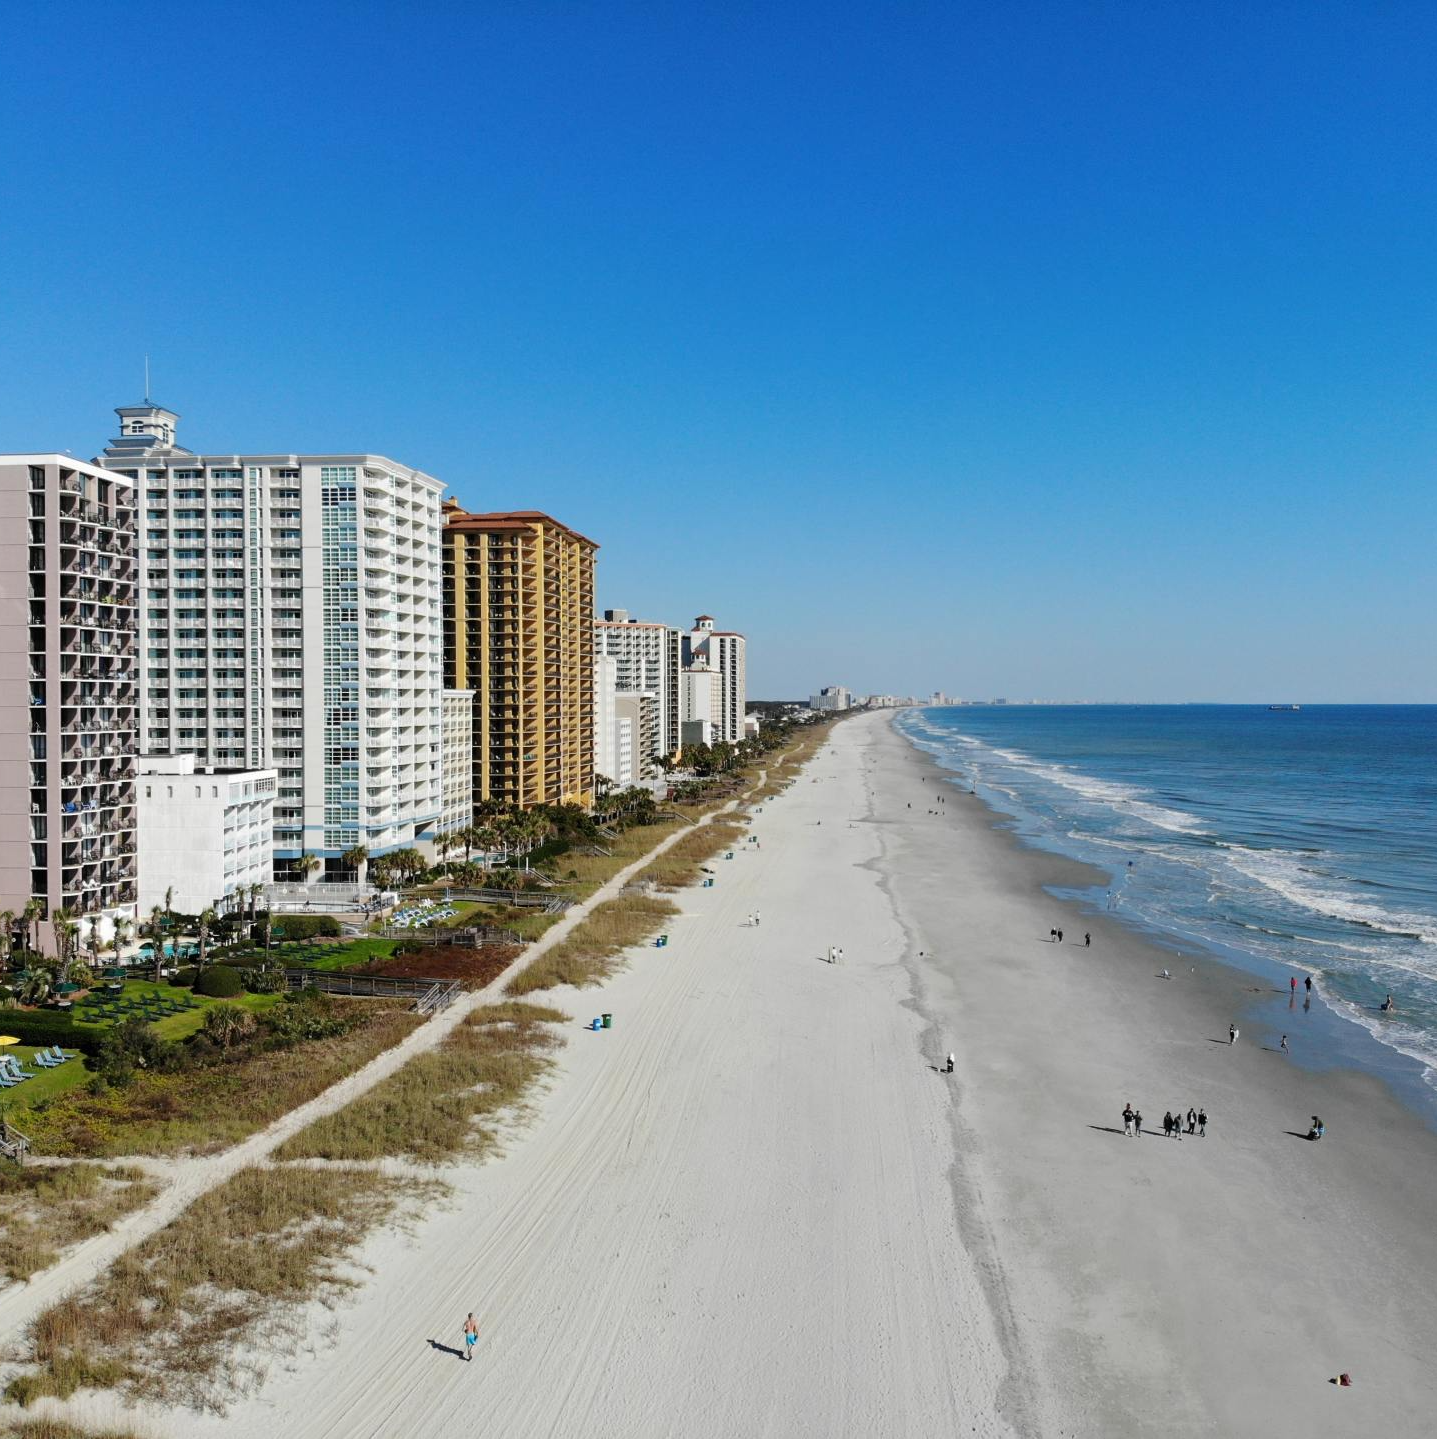 an aerial view of a beach with buildings in the background .